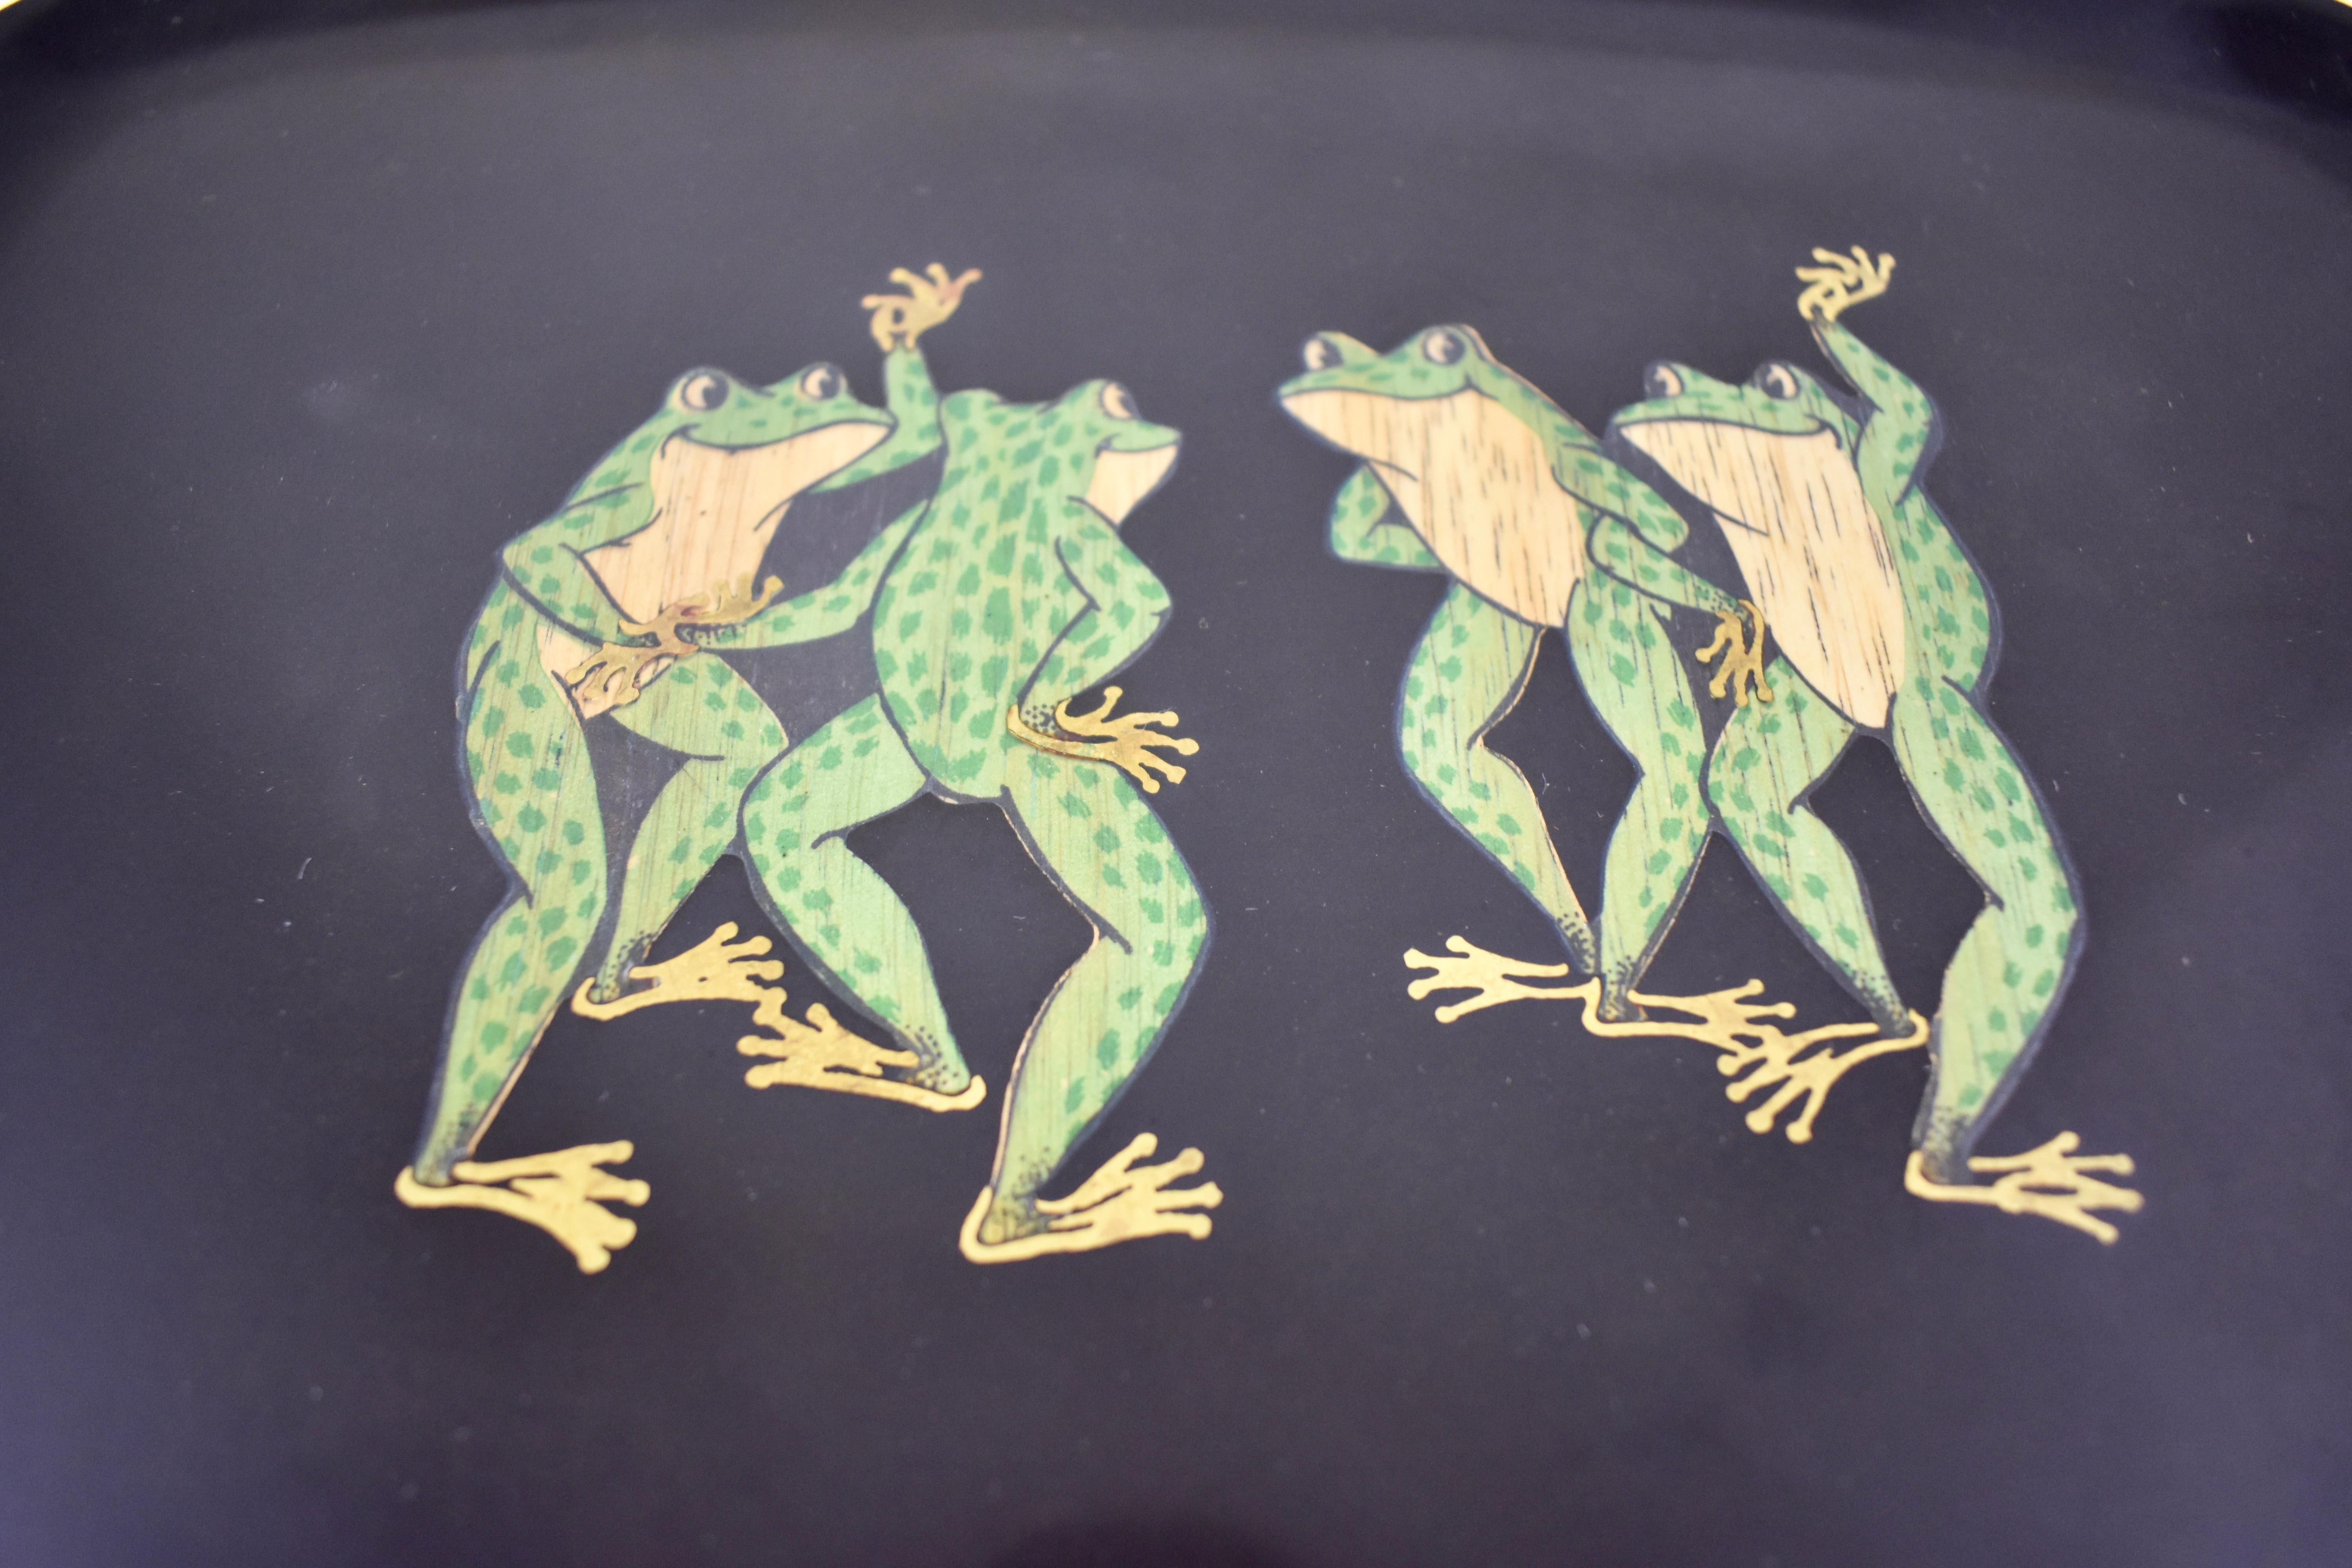 A midcentury serving tray by Couroc of Monterey, California, (1848-1998), The Dancing Frogs pattern, circa 1960s.

Made of a black resin called ‘Phenolic’ and hand inlaid with the image of four in green dyed wood with brass accents. Having the